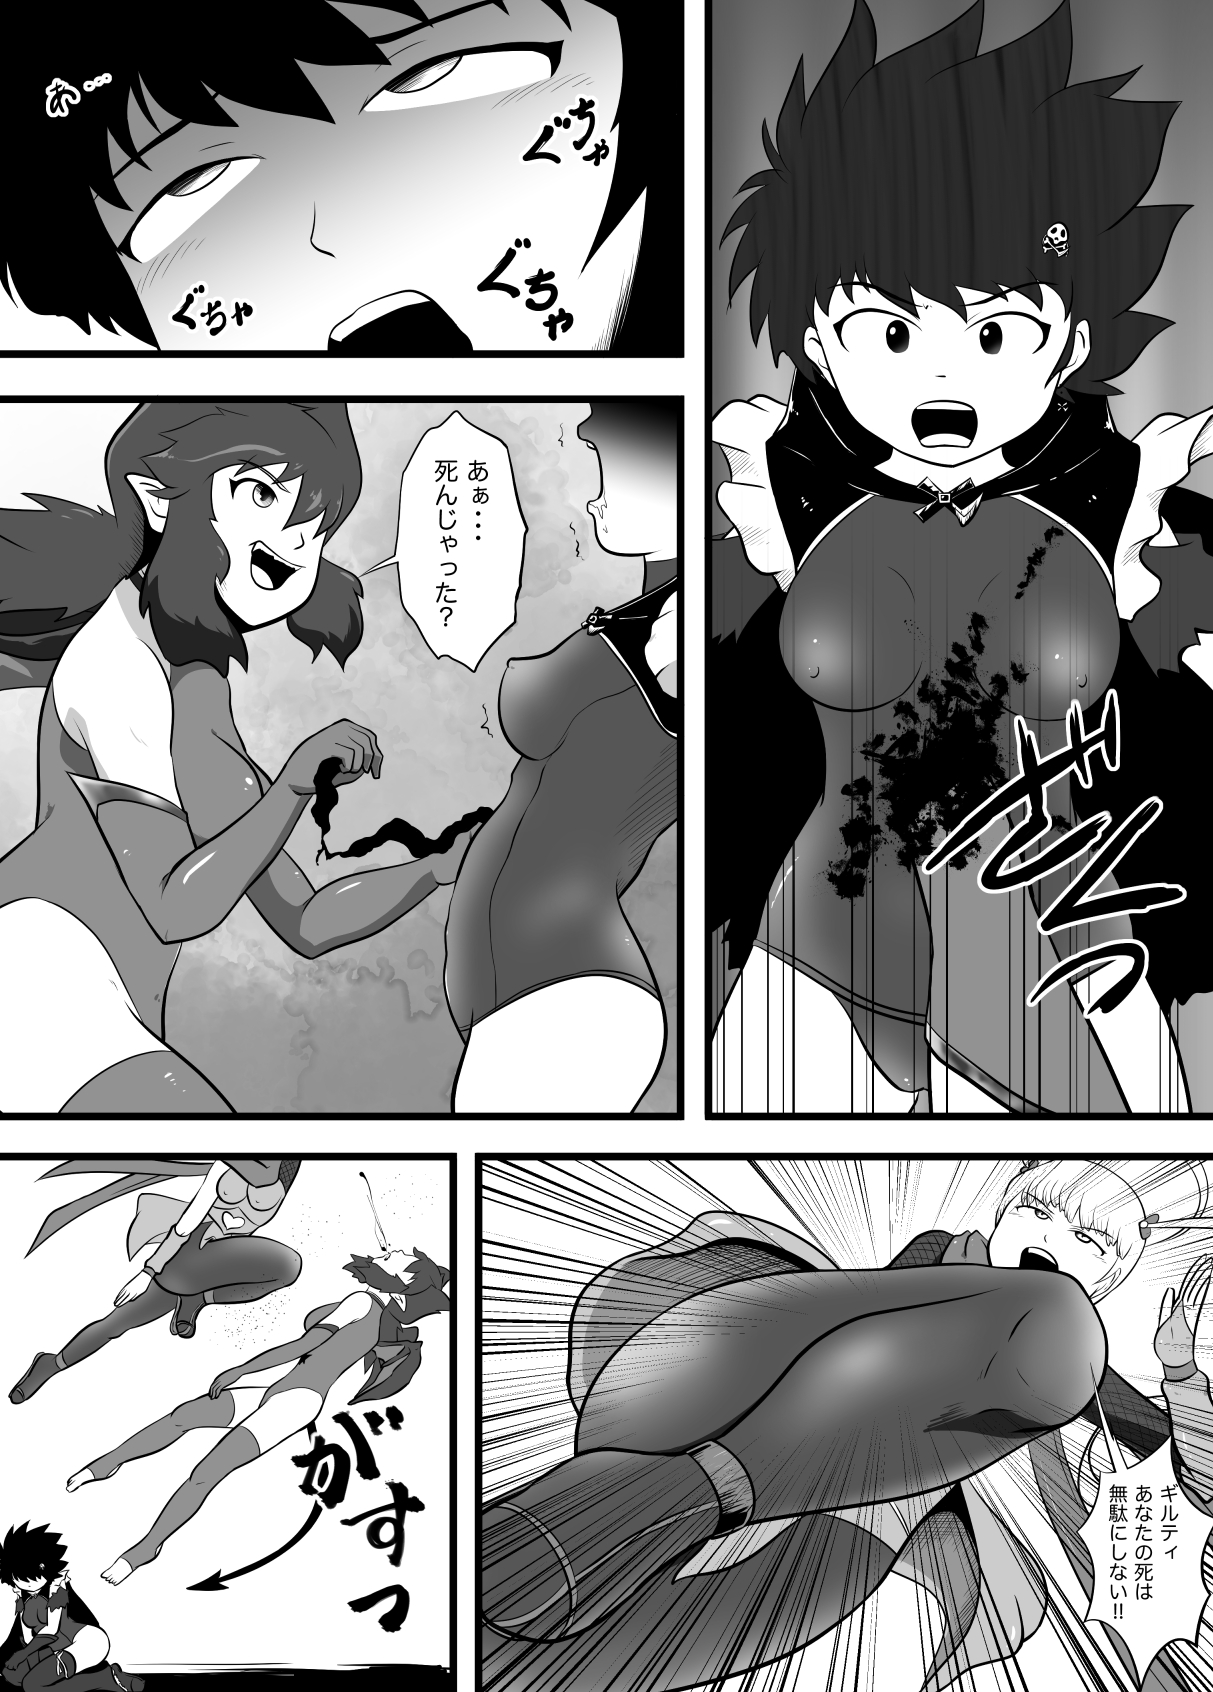 Guilty Black page 9 full